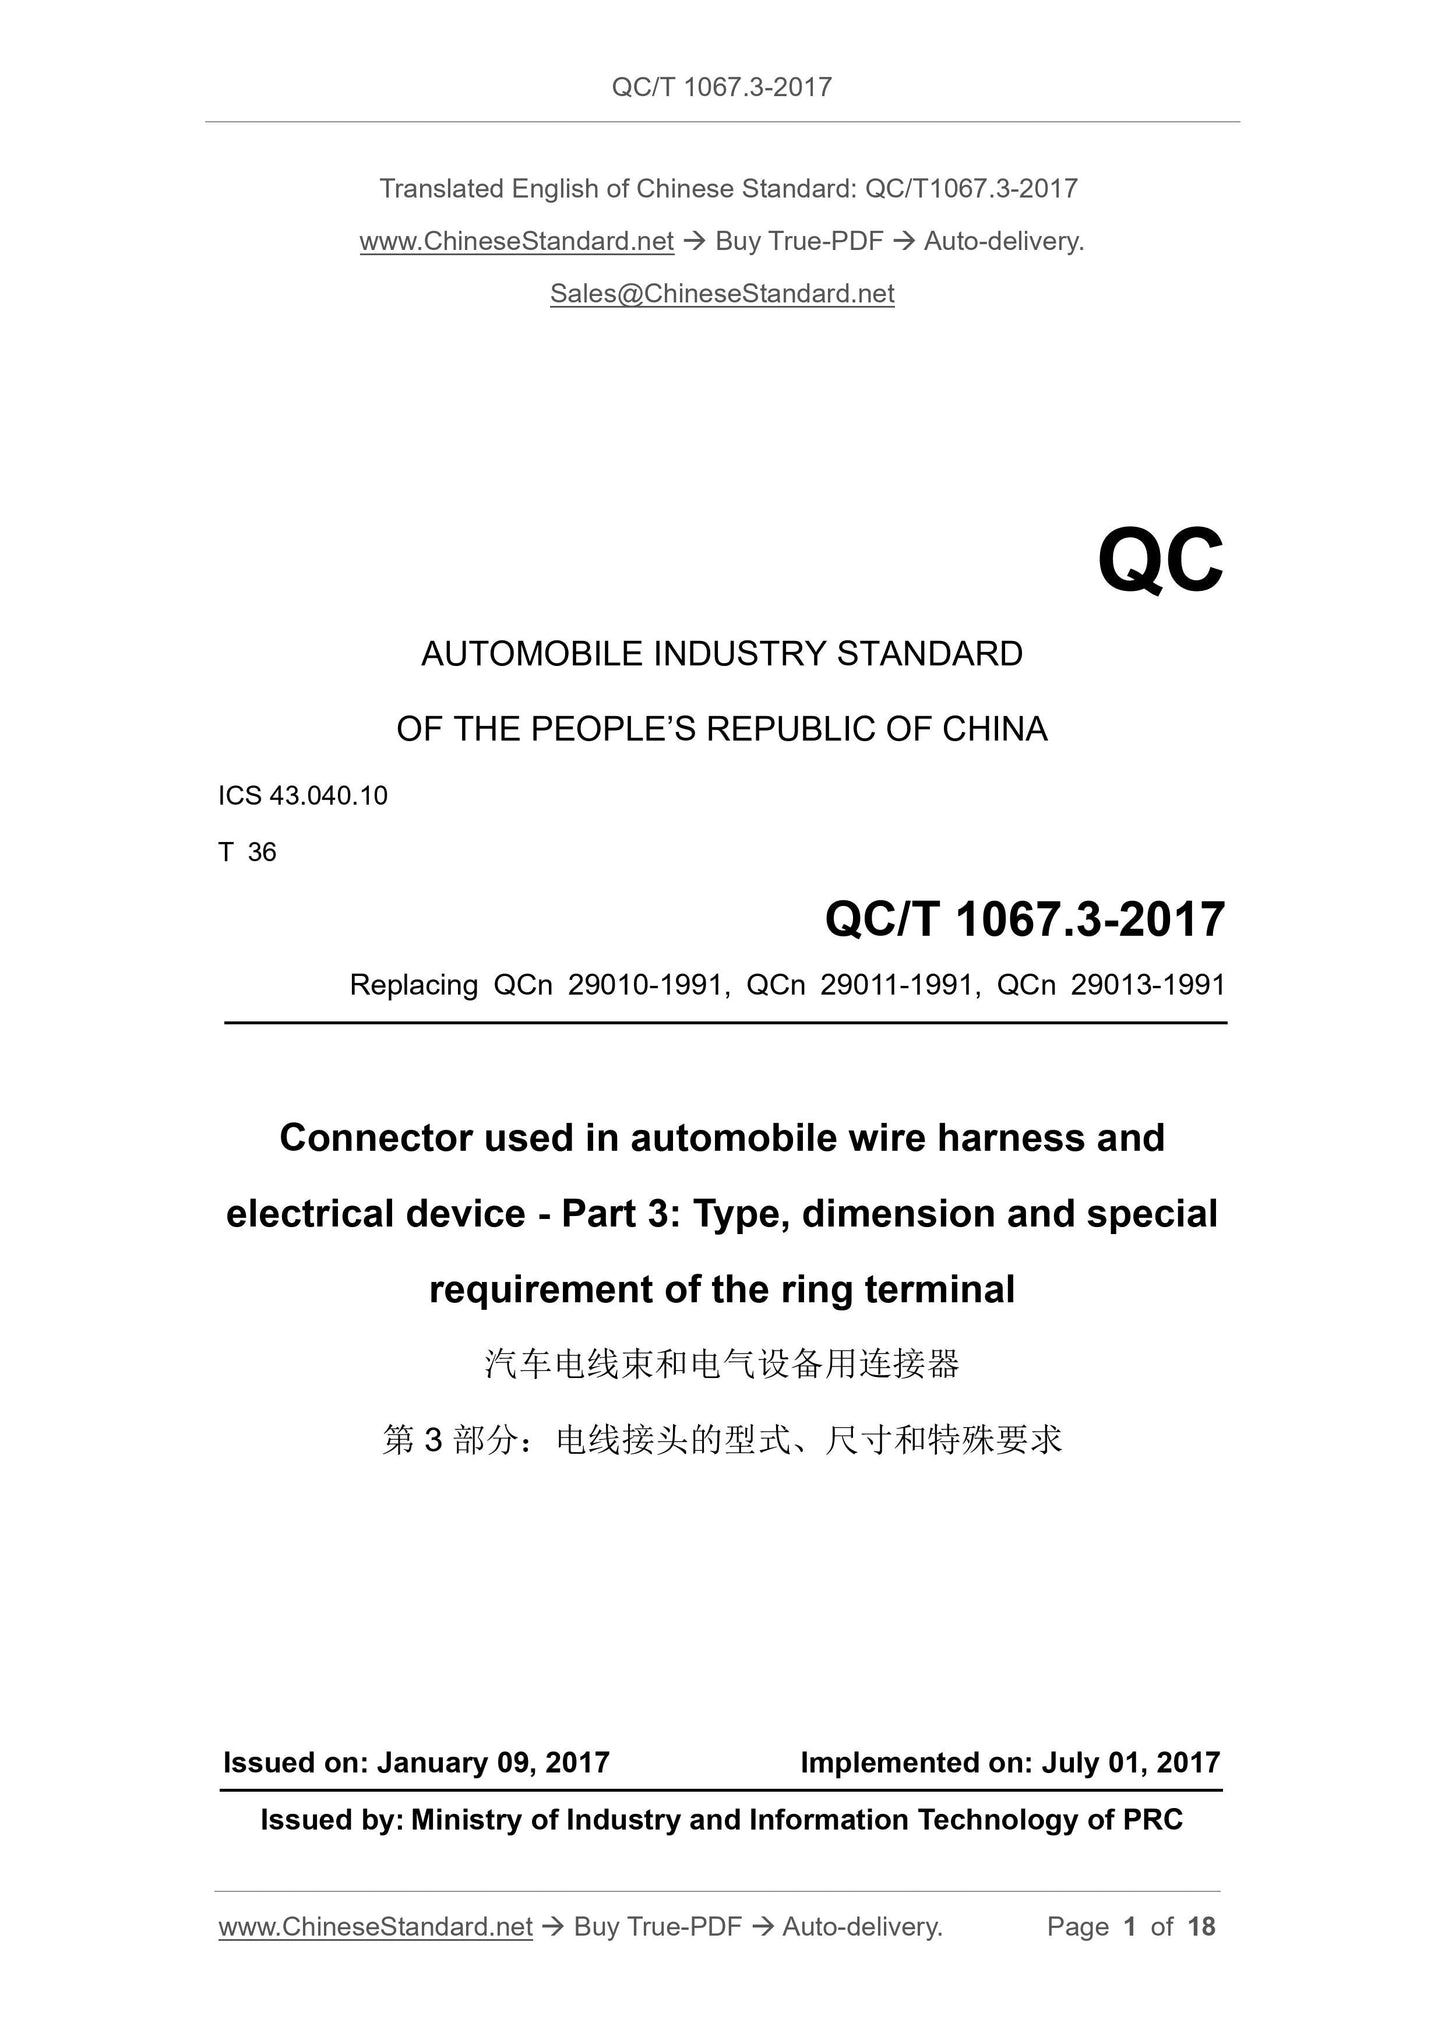 QC/T 1067.3-2017 Page 1